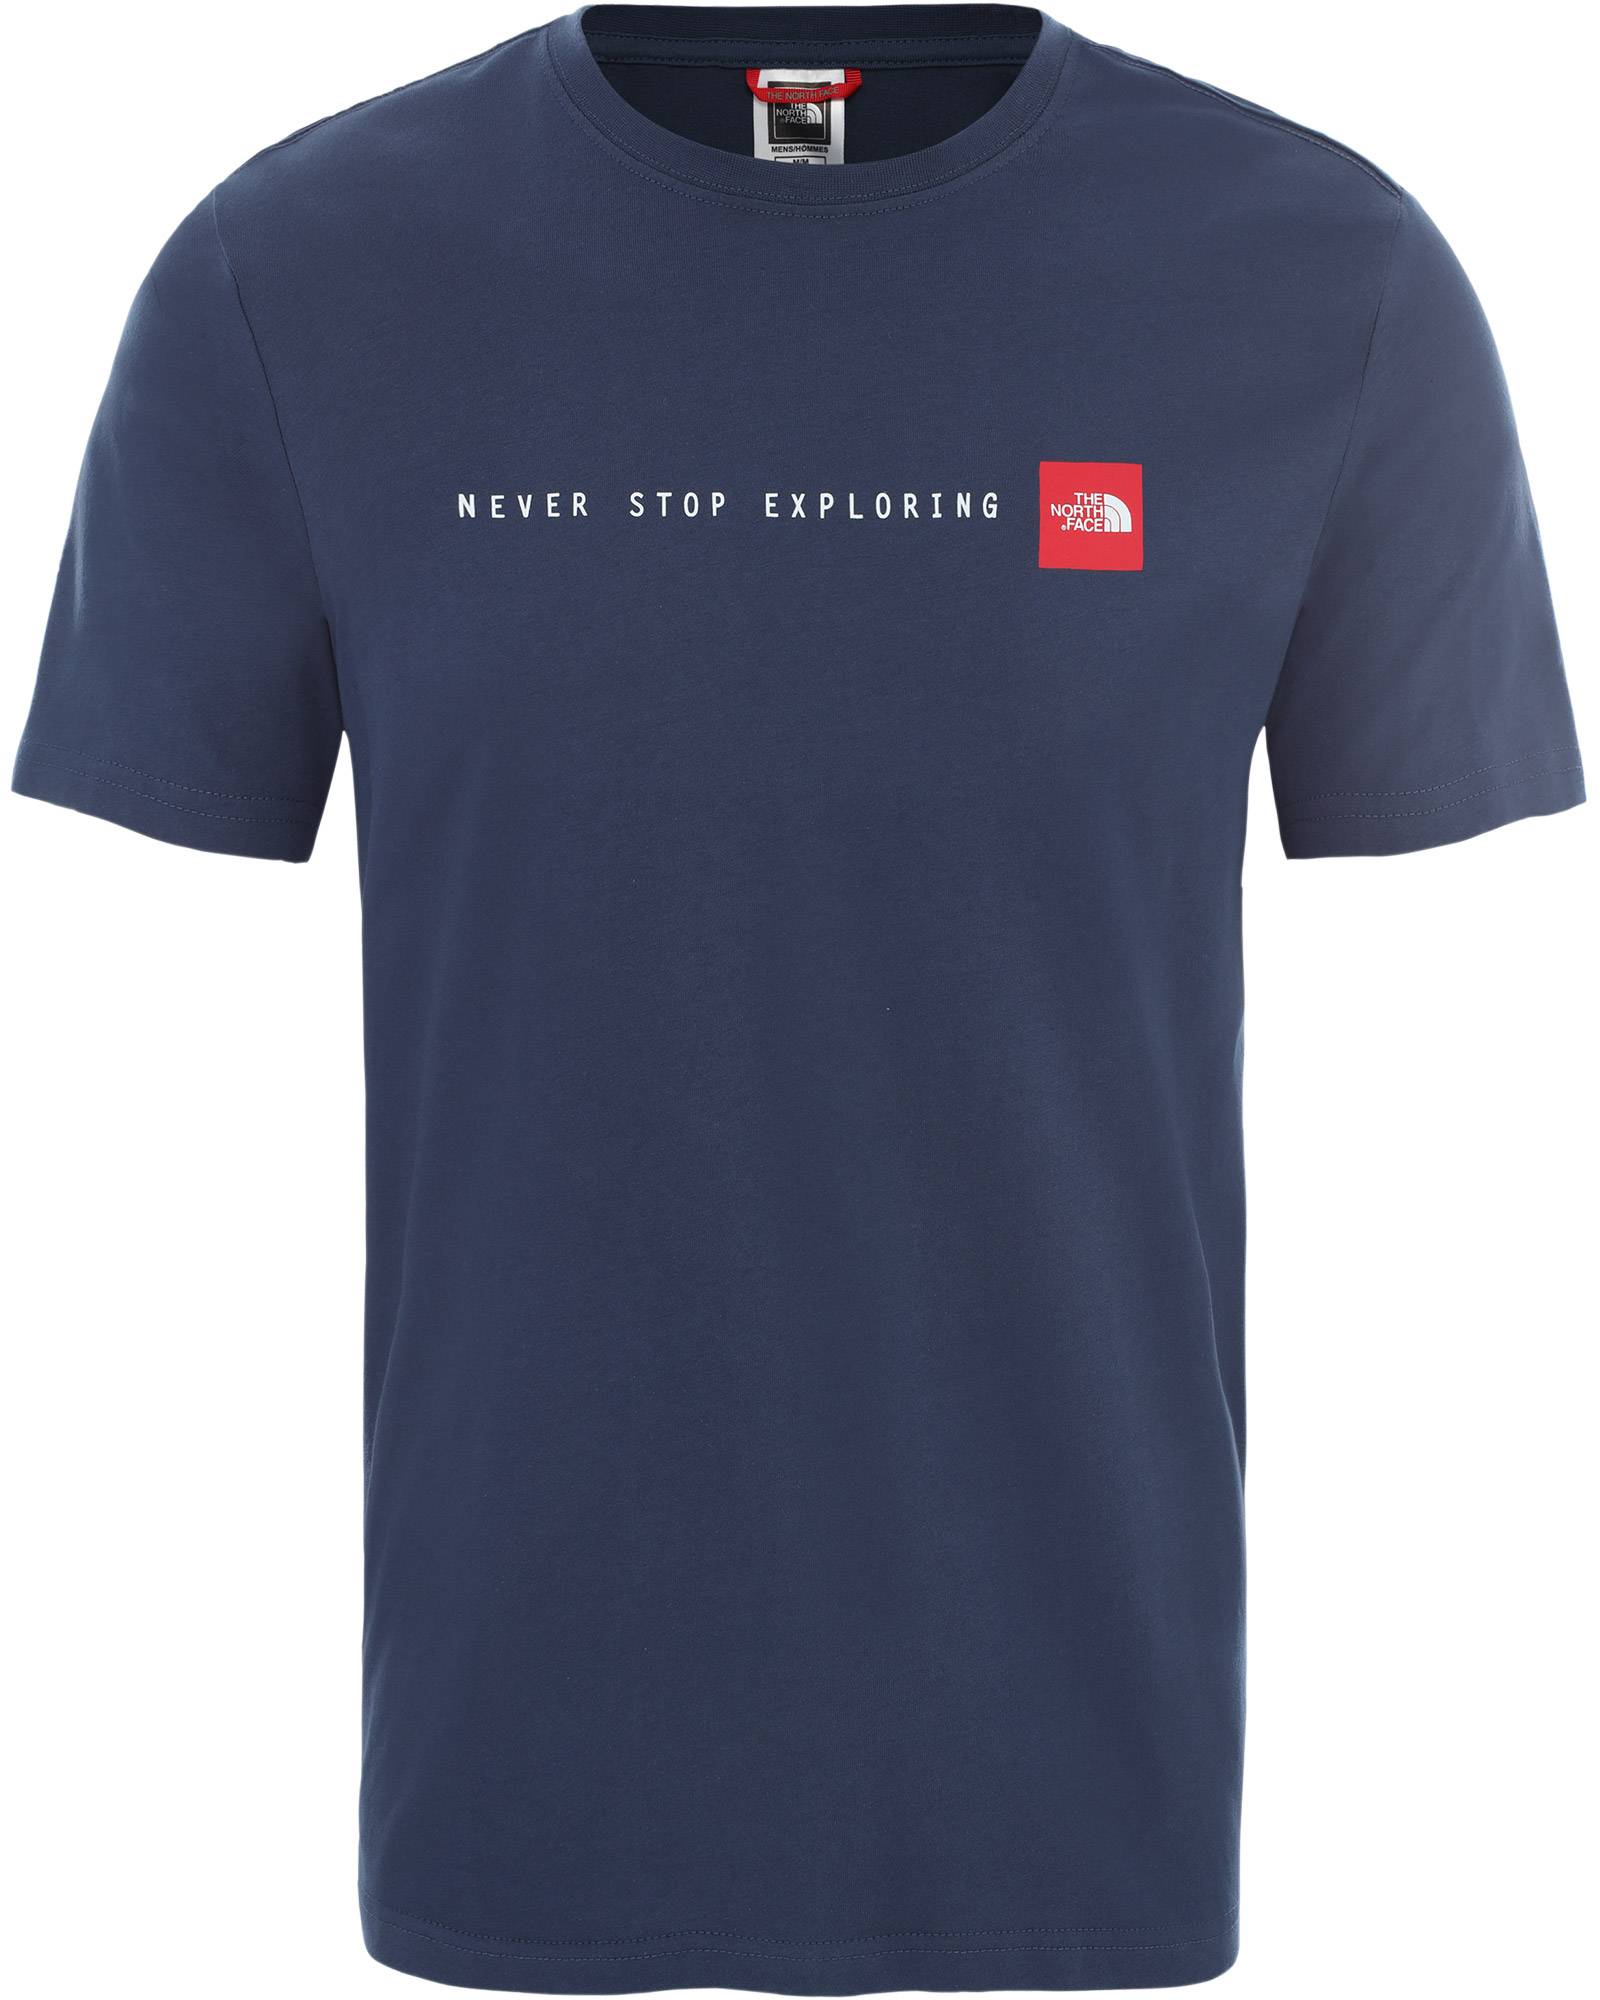 The North Face NSE Men’s T Shirt - Blue Wing Teal XS